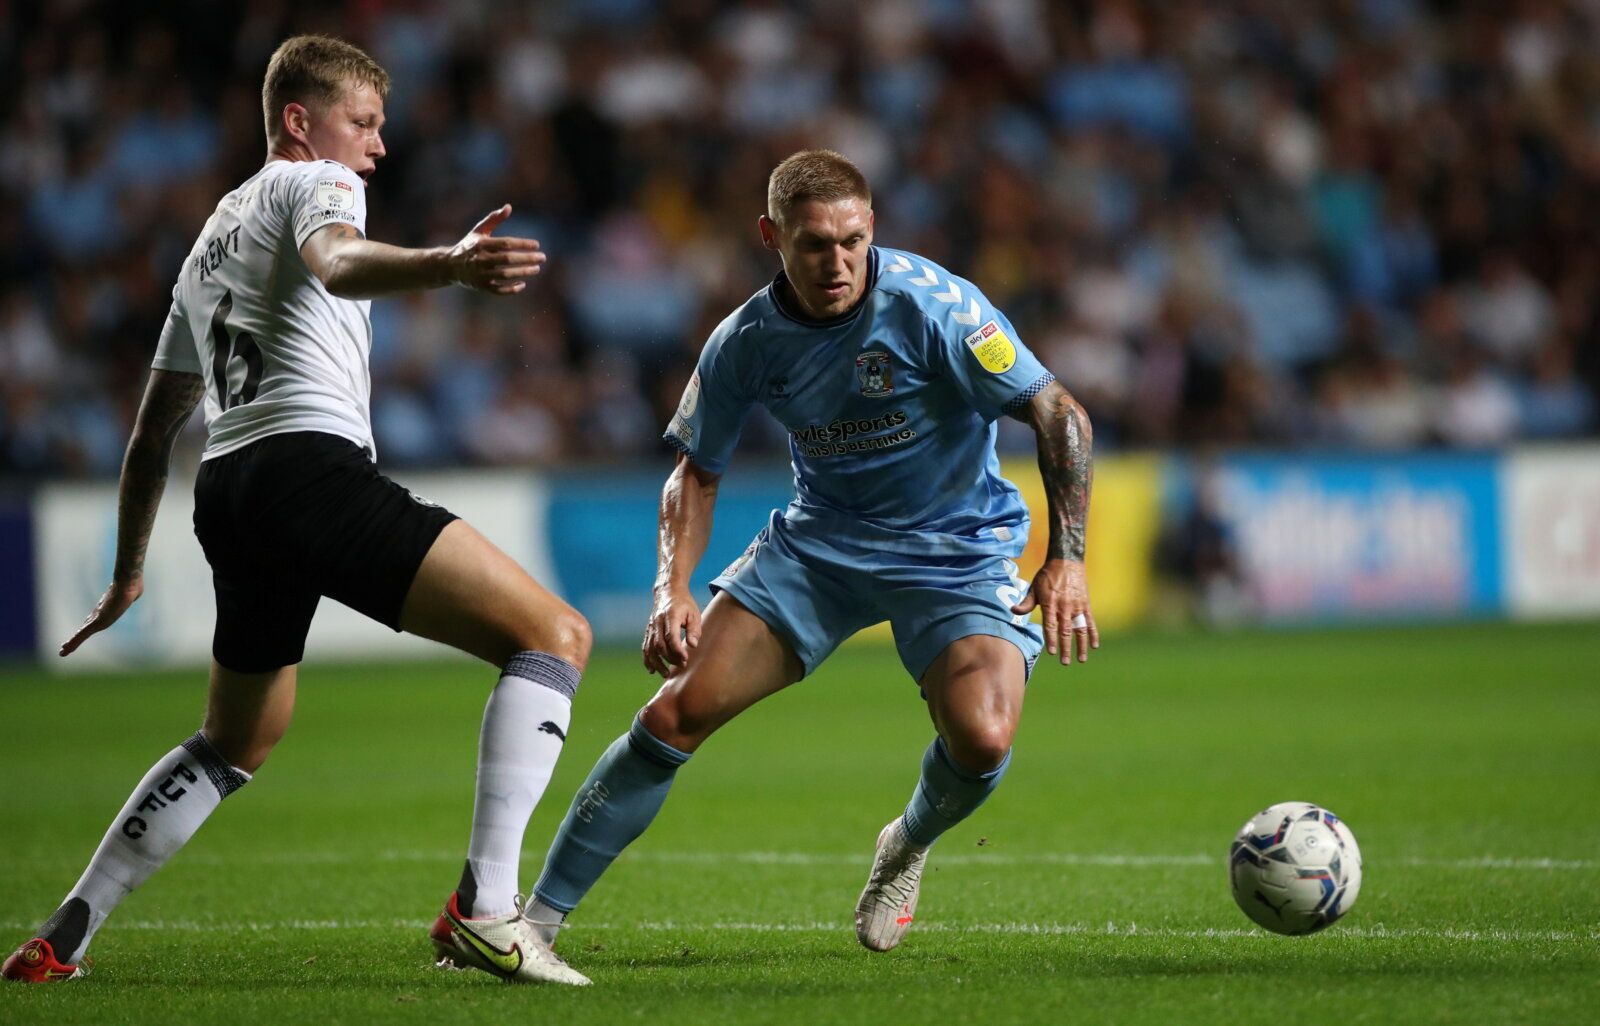 Soccer Football - Championship - Coventry City v Peterborough United - Coventry Building Society Arena, Birmingham, Britain - September 24, 2021 Coventry City’s Martyn Waghorn in action with Peterborough United’s Frankie Kent  Action Images/Peter Cziborra  EDITORIAL USE ONLY. No use with unauthorized audio, video, data, fixture lists, club/league logos or 